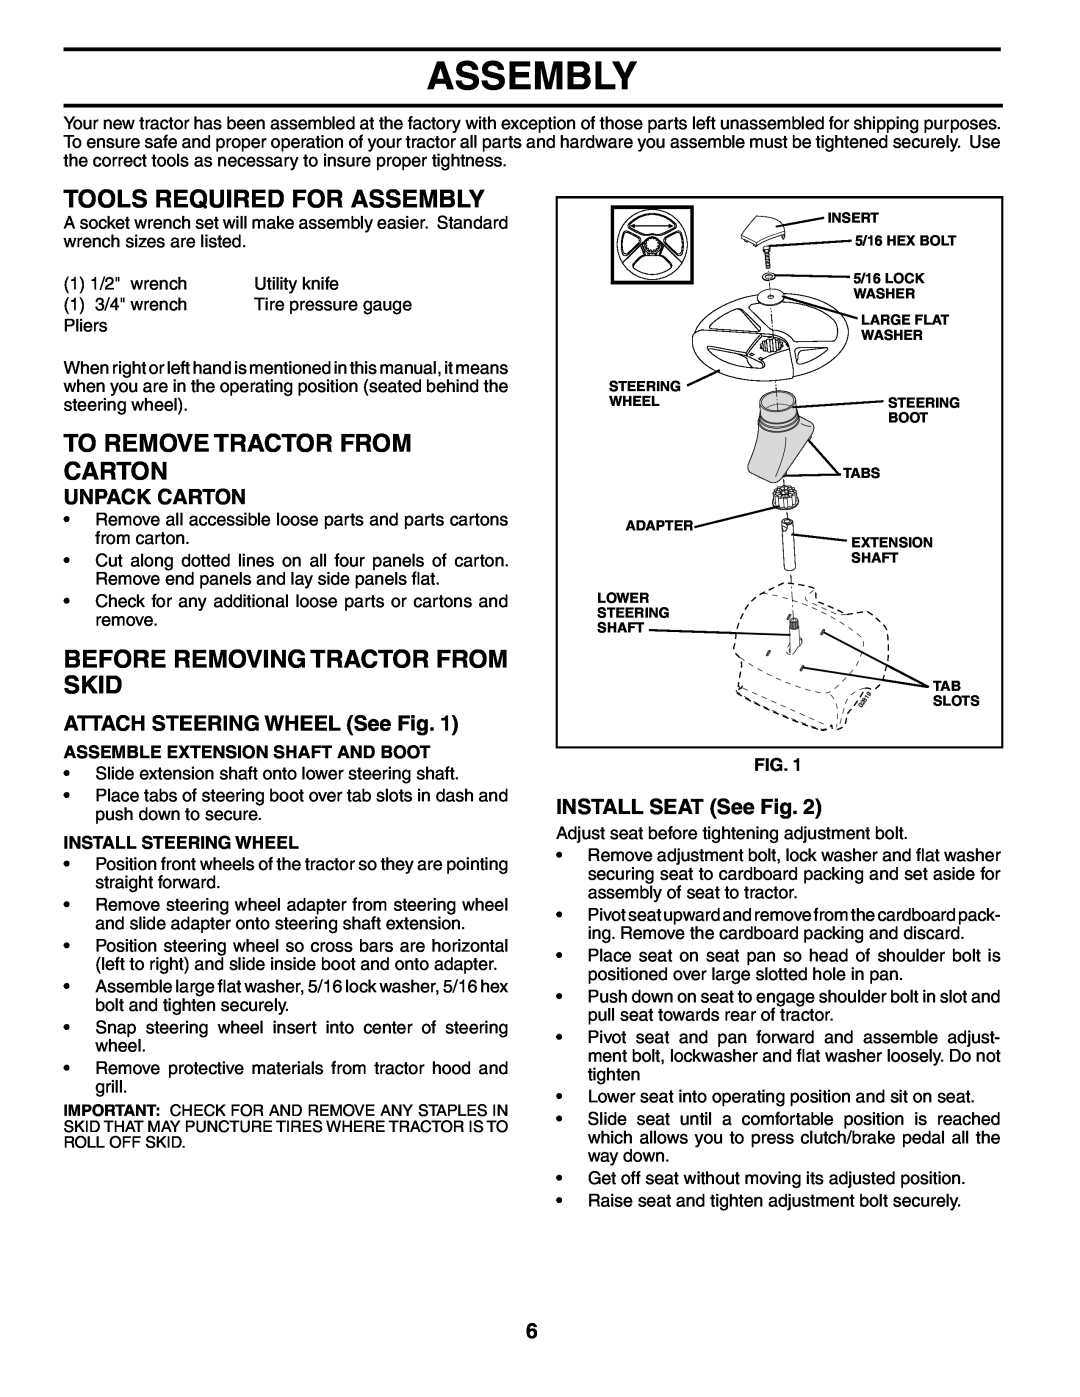 Poulan 96012004400 manual Tools Required For Assembly, To Remove Tractor From Carton, Before Removing Tractor From Skid 